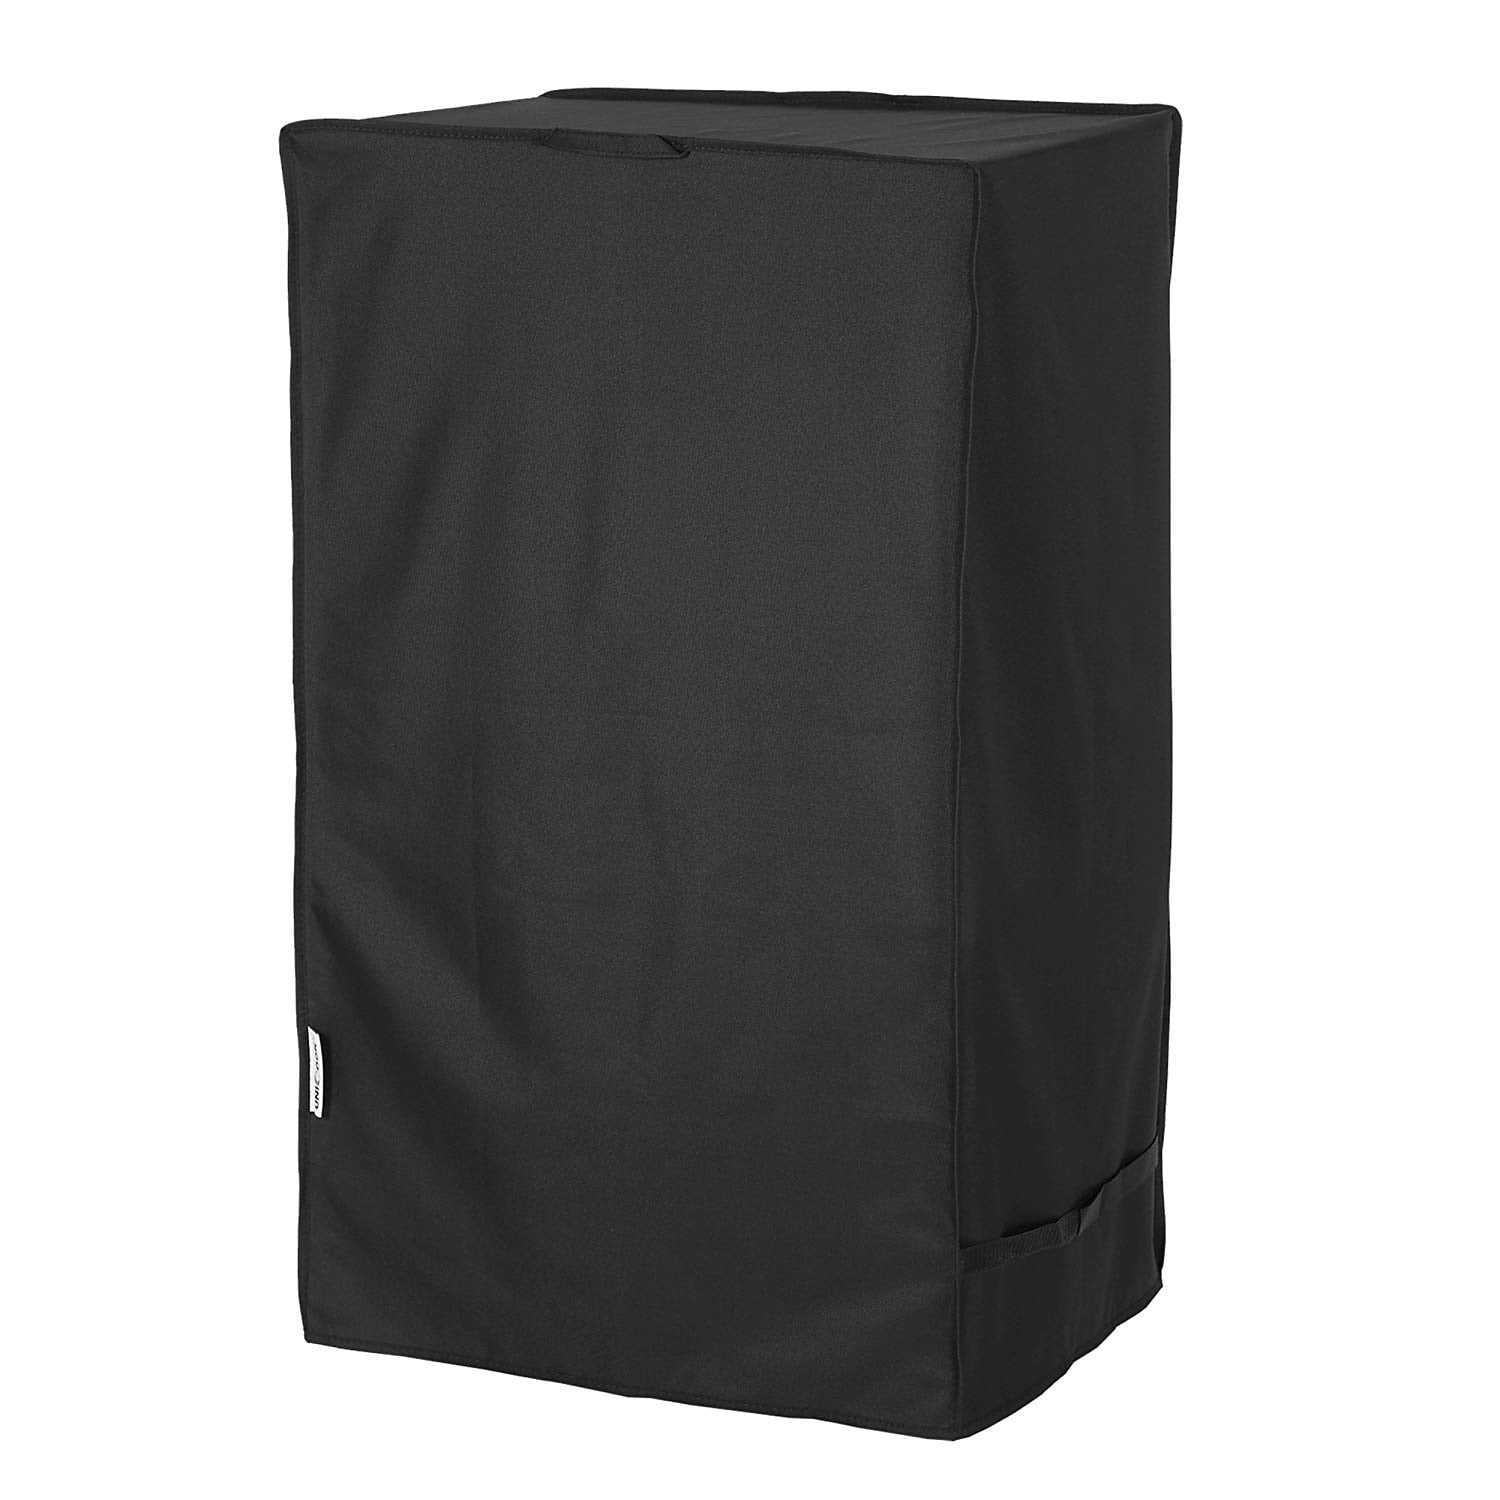 Masterbuilt 40 Inch Electric Smoker Cover Waterproof Fade resistant Covers New 